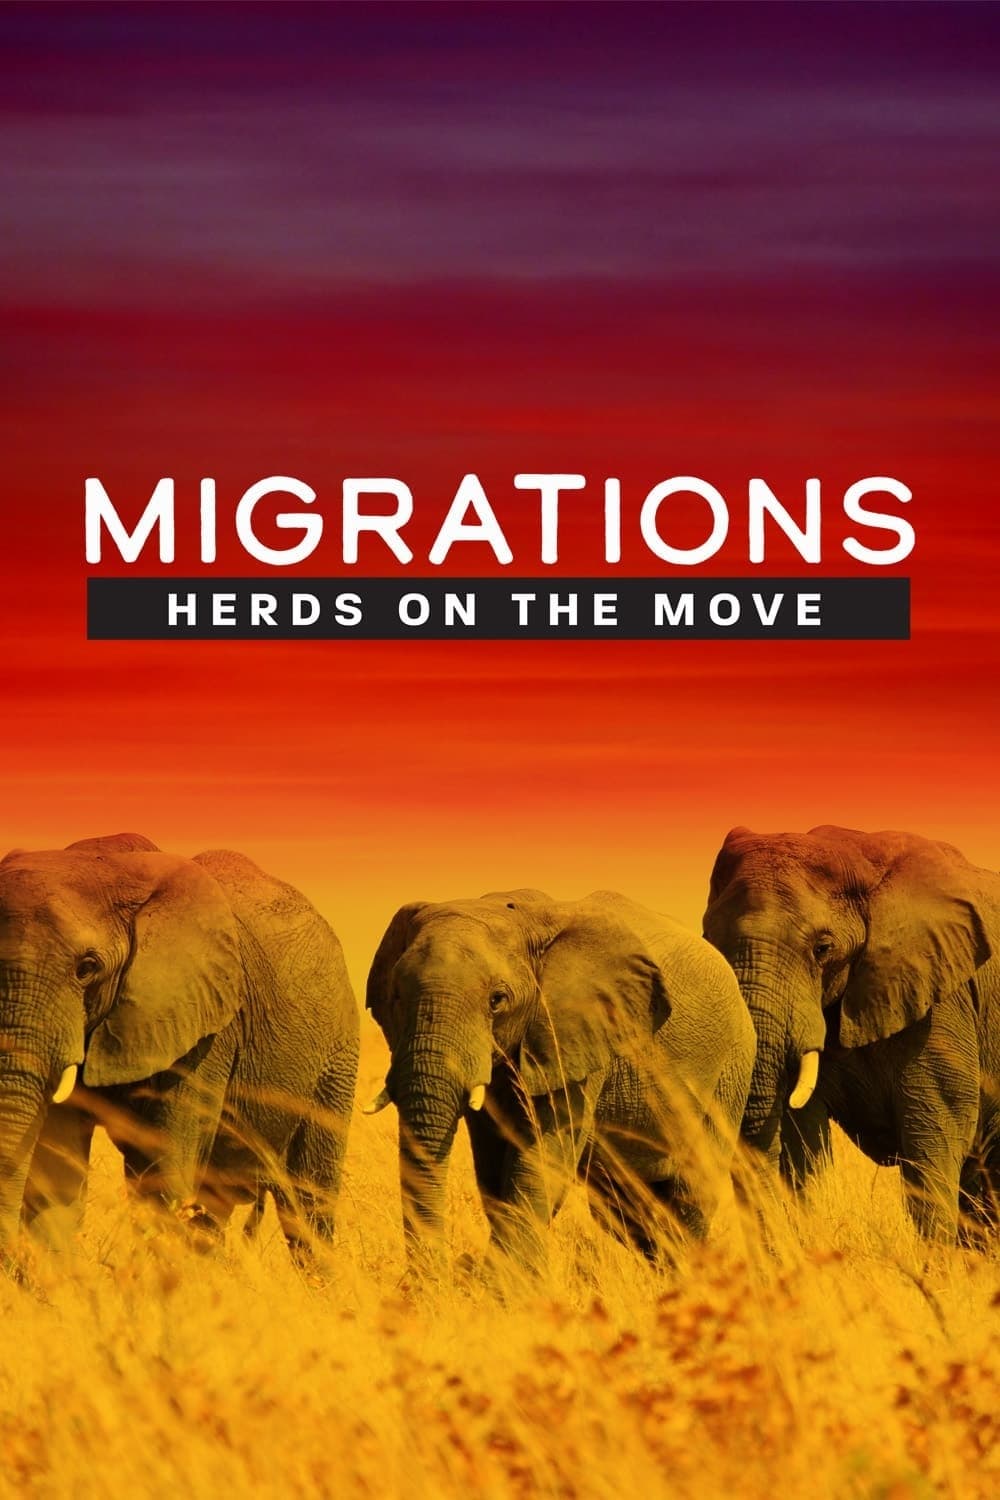 Migrations: Herds on the Move